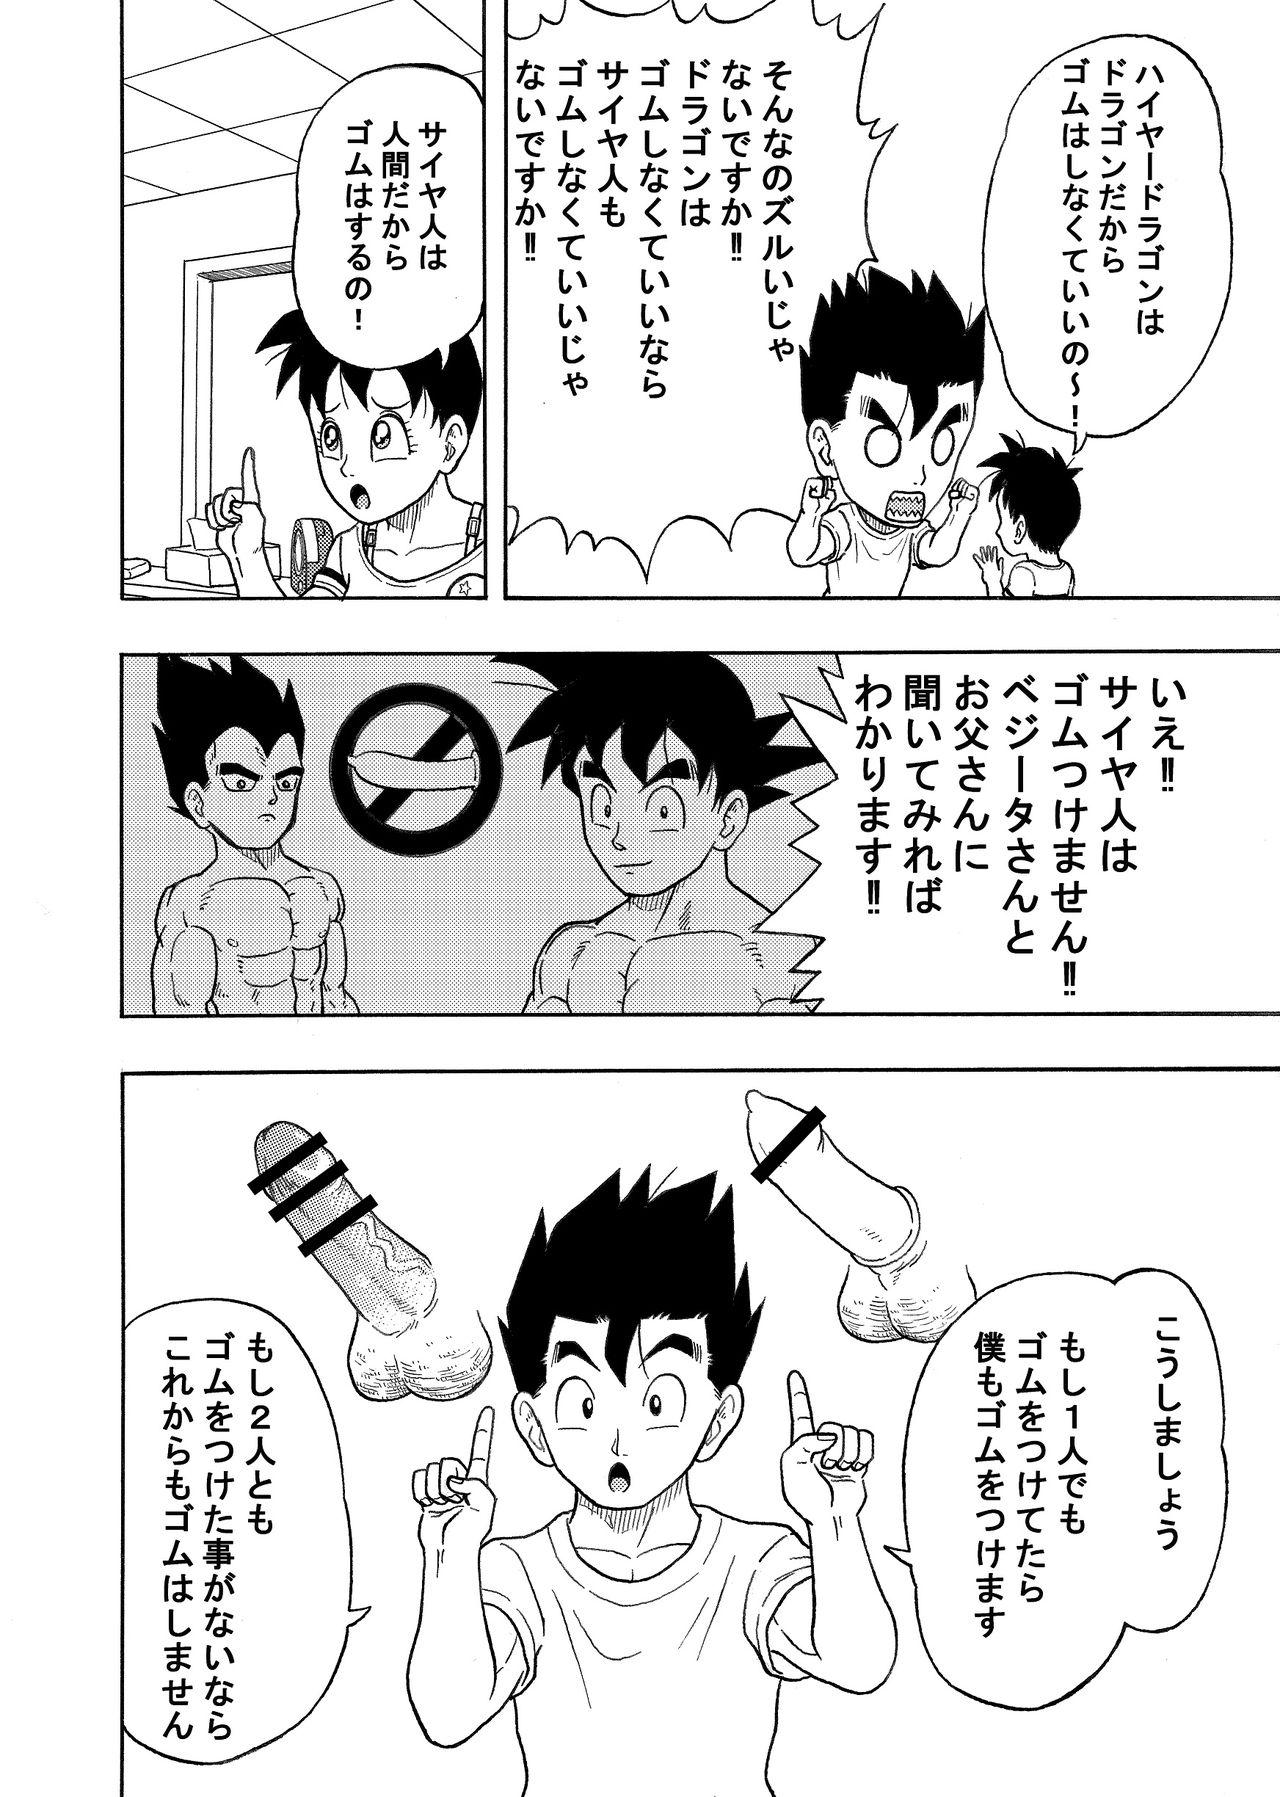 Mamada I can't put on a condom - Dragon ball z Exhib - Page 7